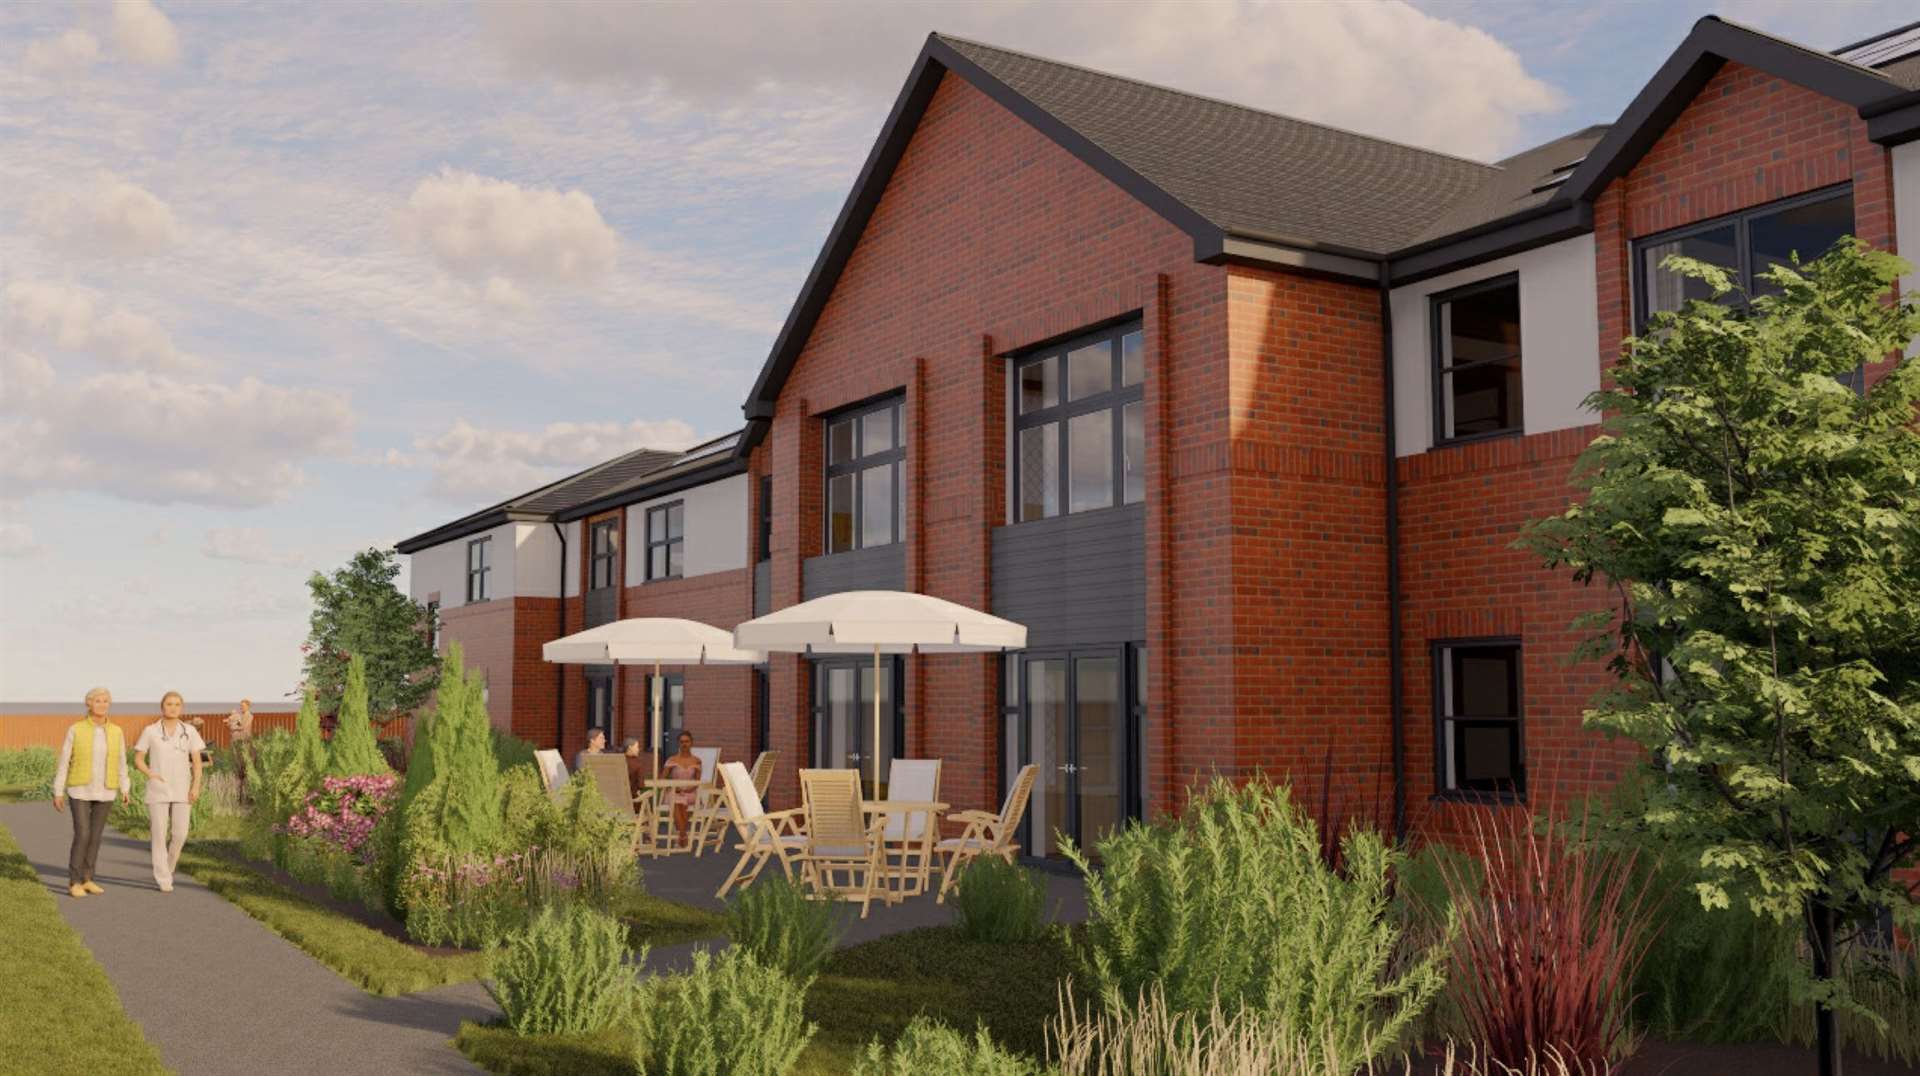 The new care facility would feature amenities such as a cafés, a cinema and a hairdressers. Photo: LNT Care Developments